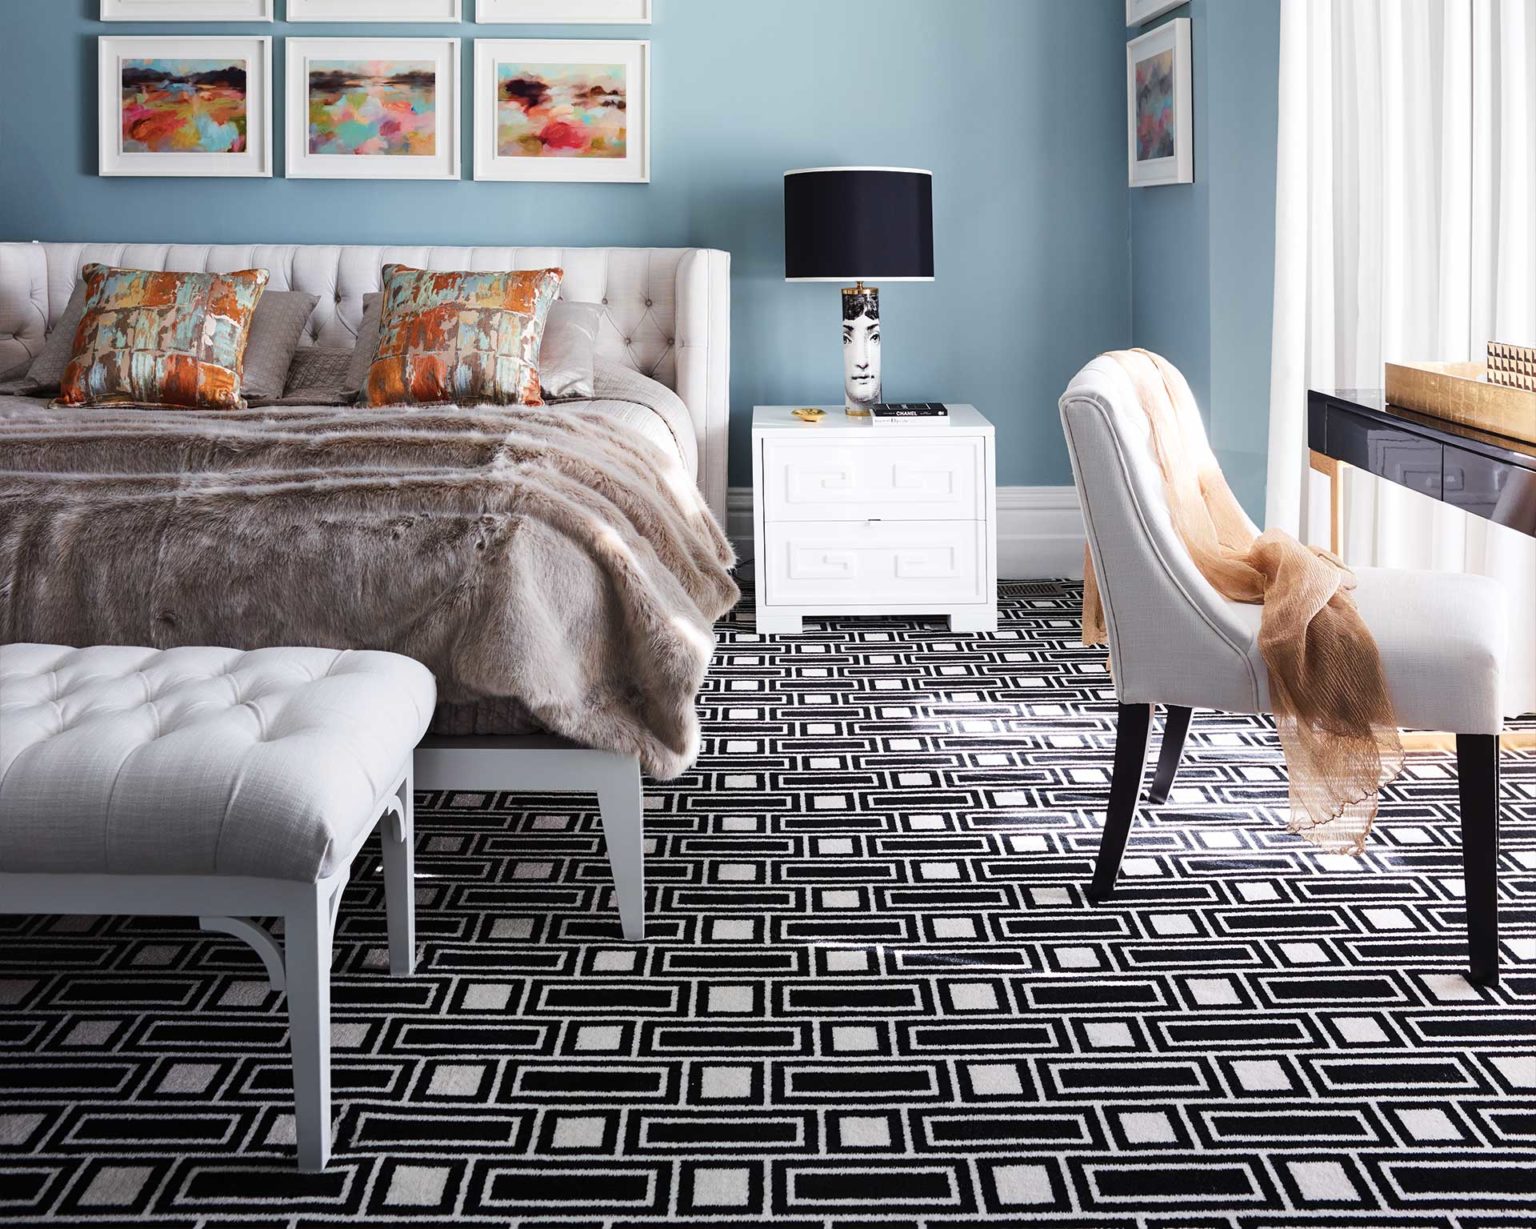 6 Bedroom Rug Ideas To Inspire, Rugs For Rooms